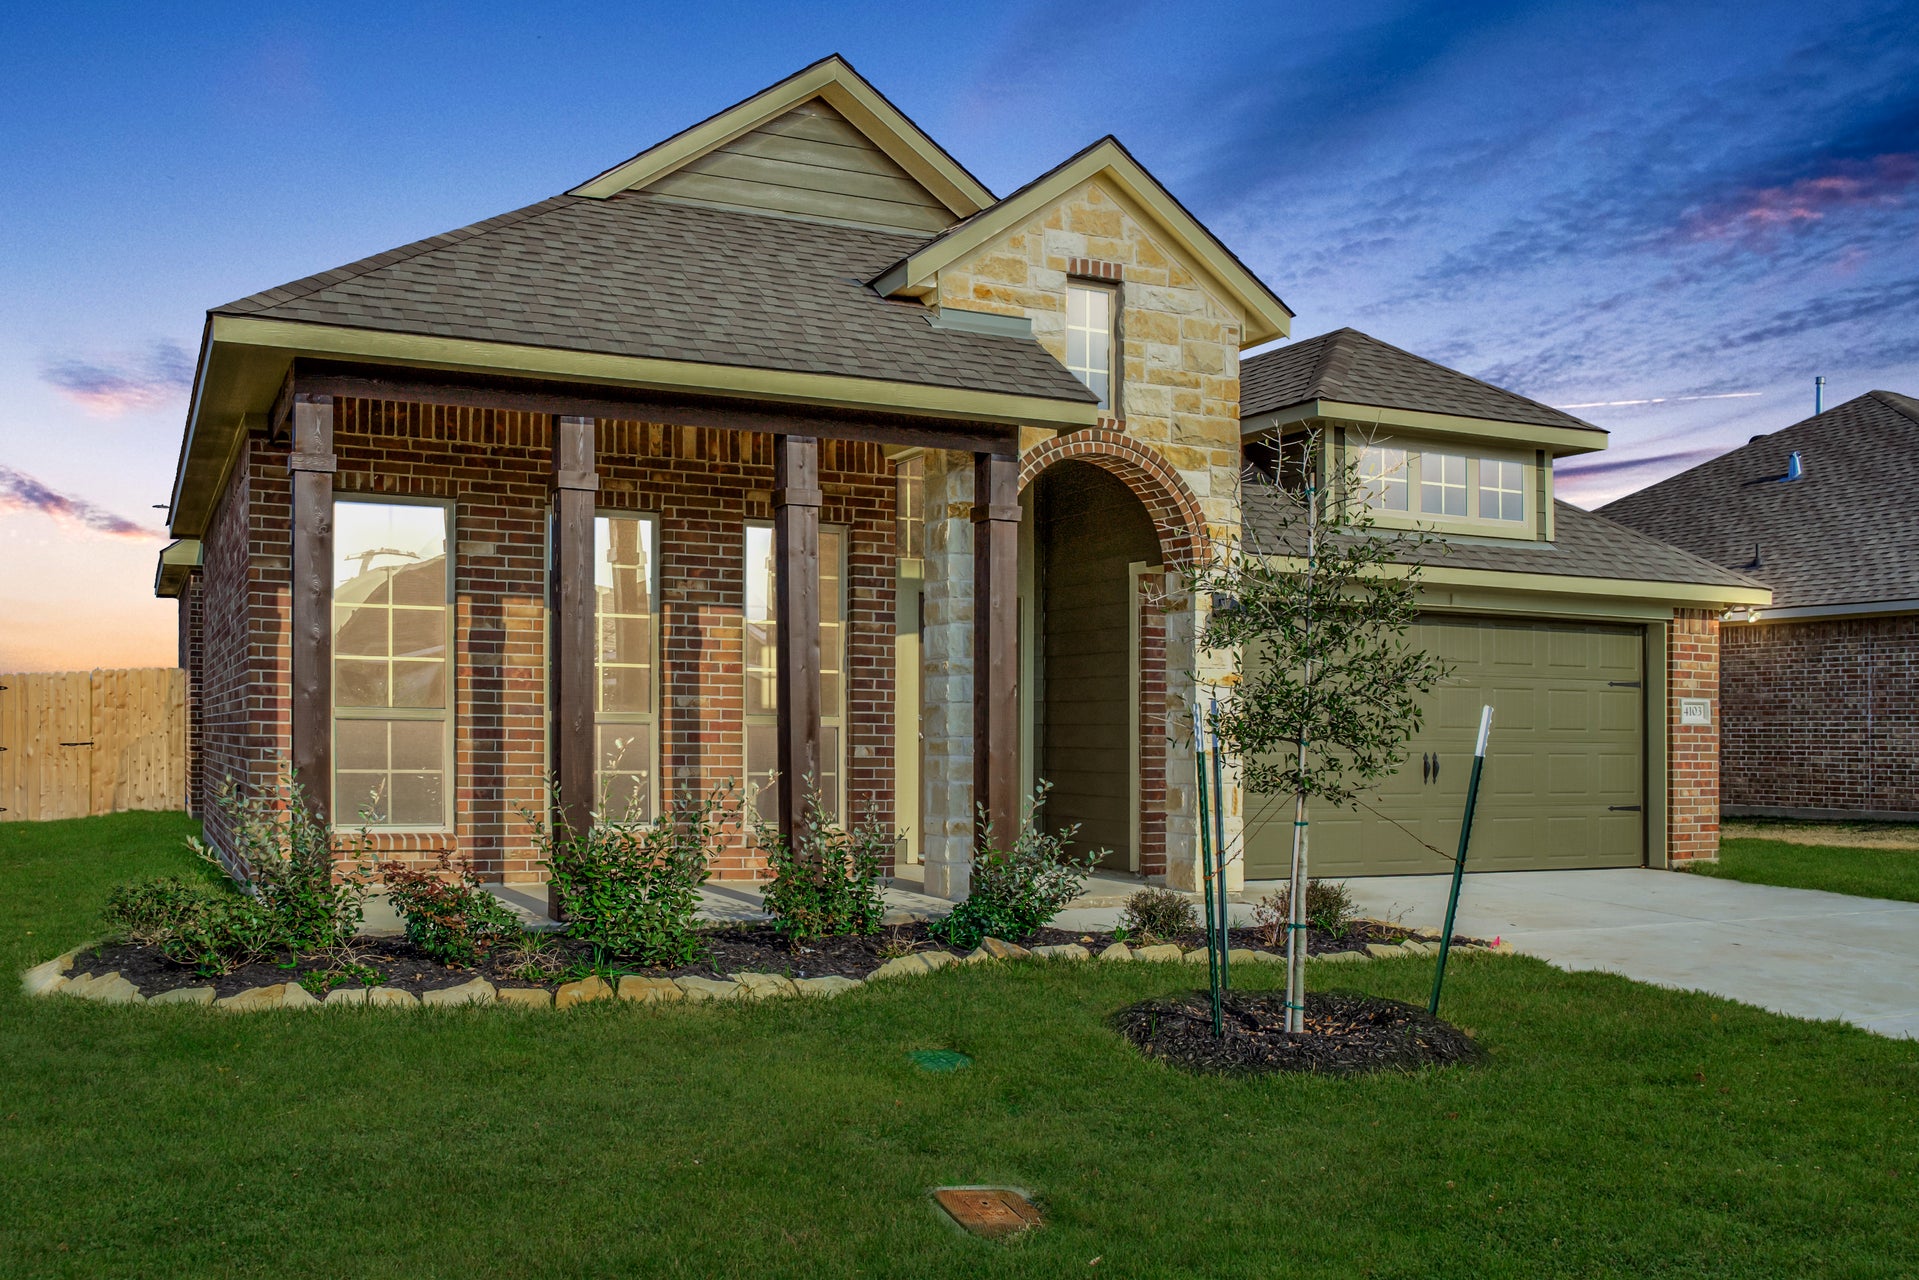 4103 Briles Court in College Station, TX